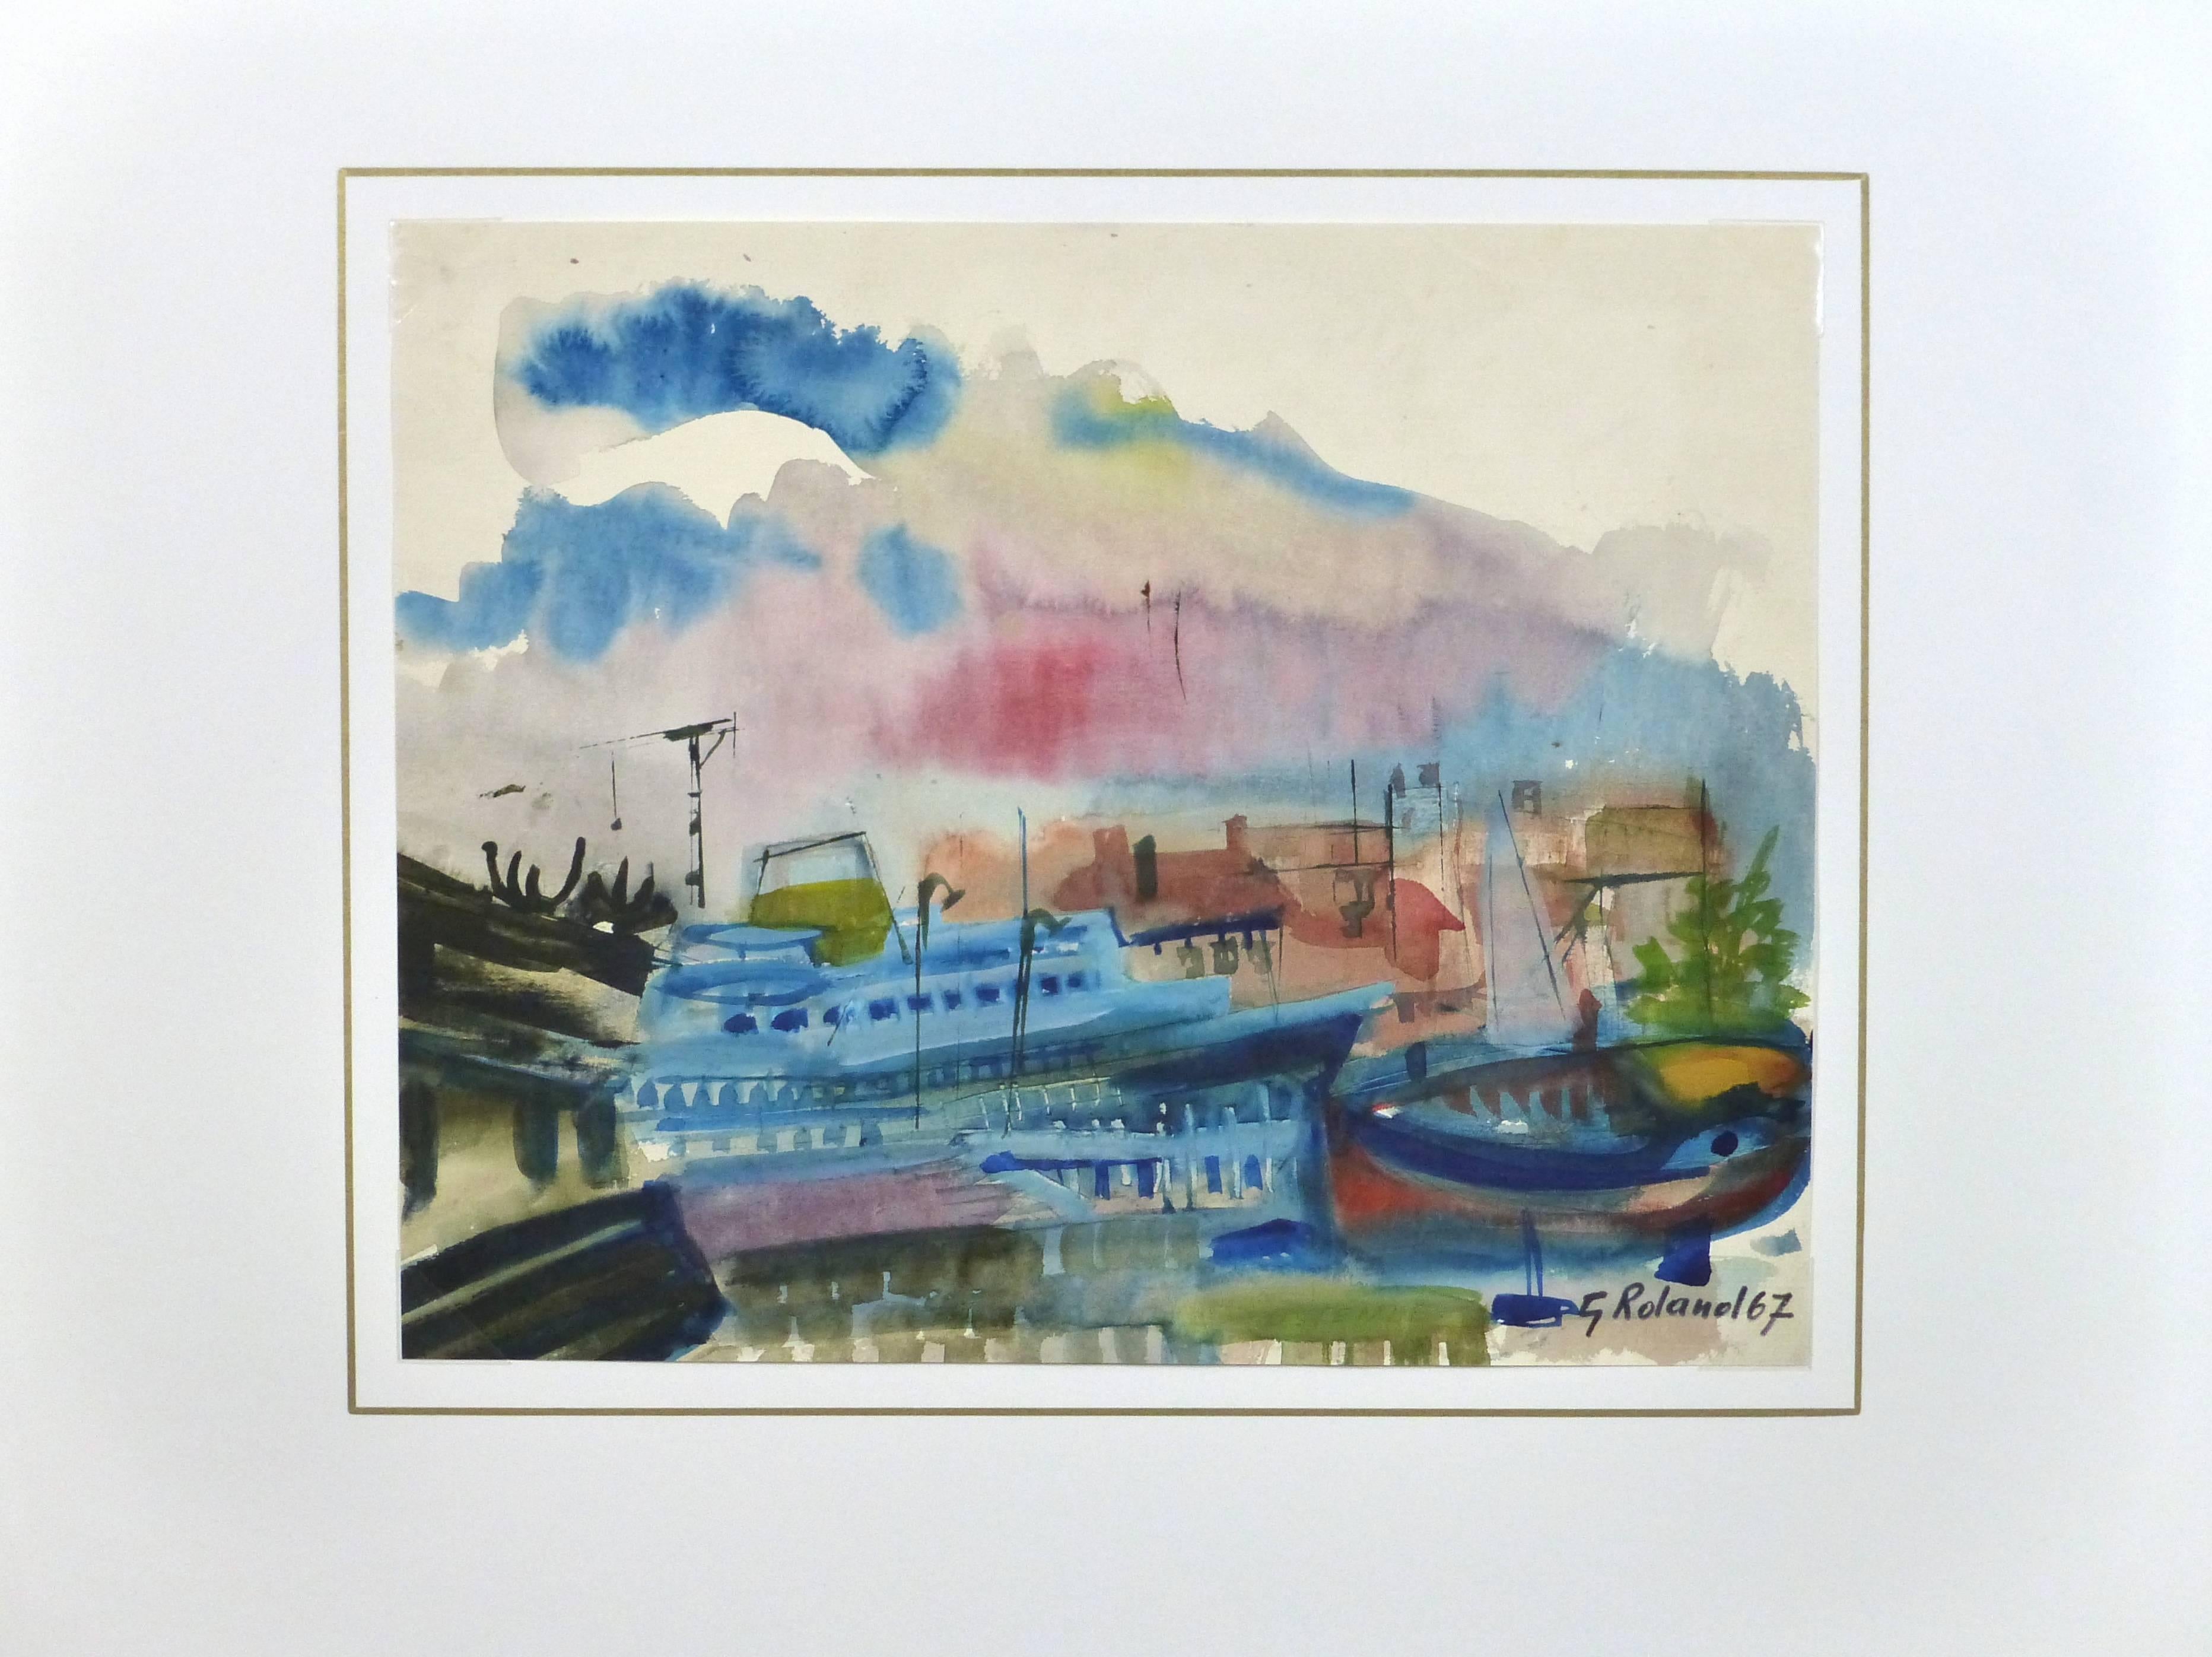 Gorgeous watercolor landscape of a colorful and bustling seaside port under a beautiful dusk colored sky by Belgian artist G. Roland, 1967. Signed and dated lower right.

Original one-of-a-kind artwork on paper displayed on a white mat with a gold